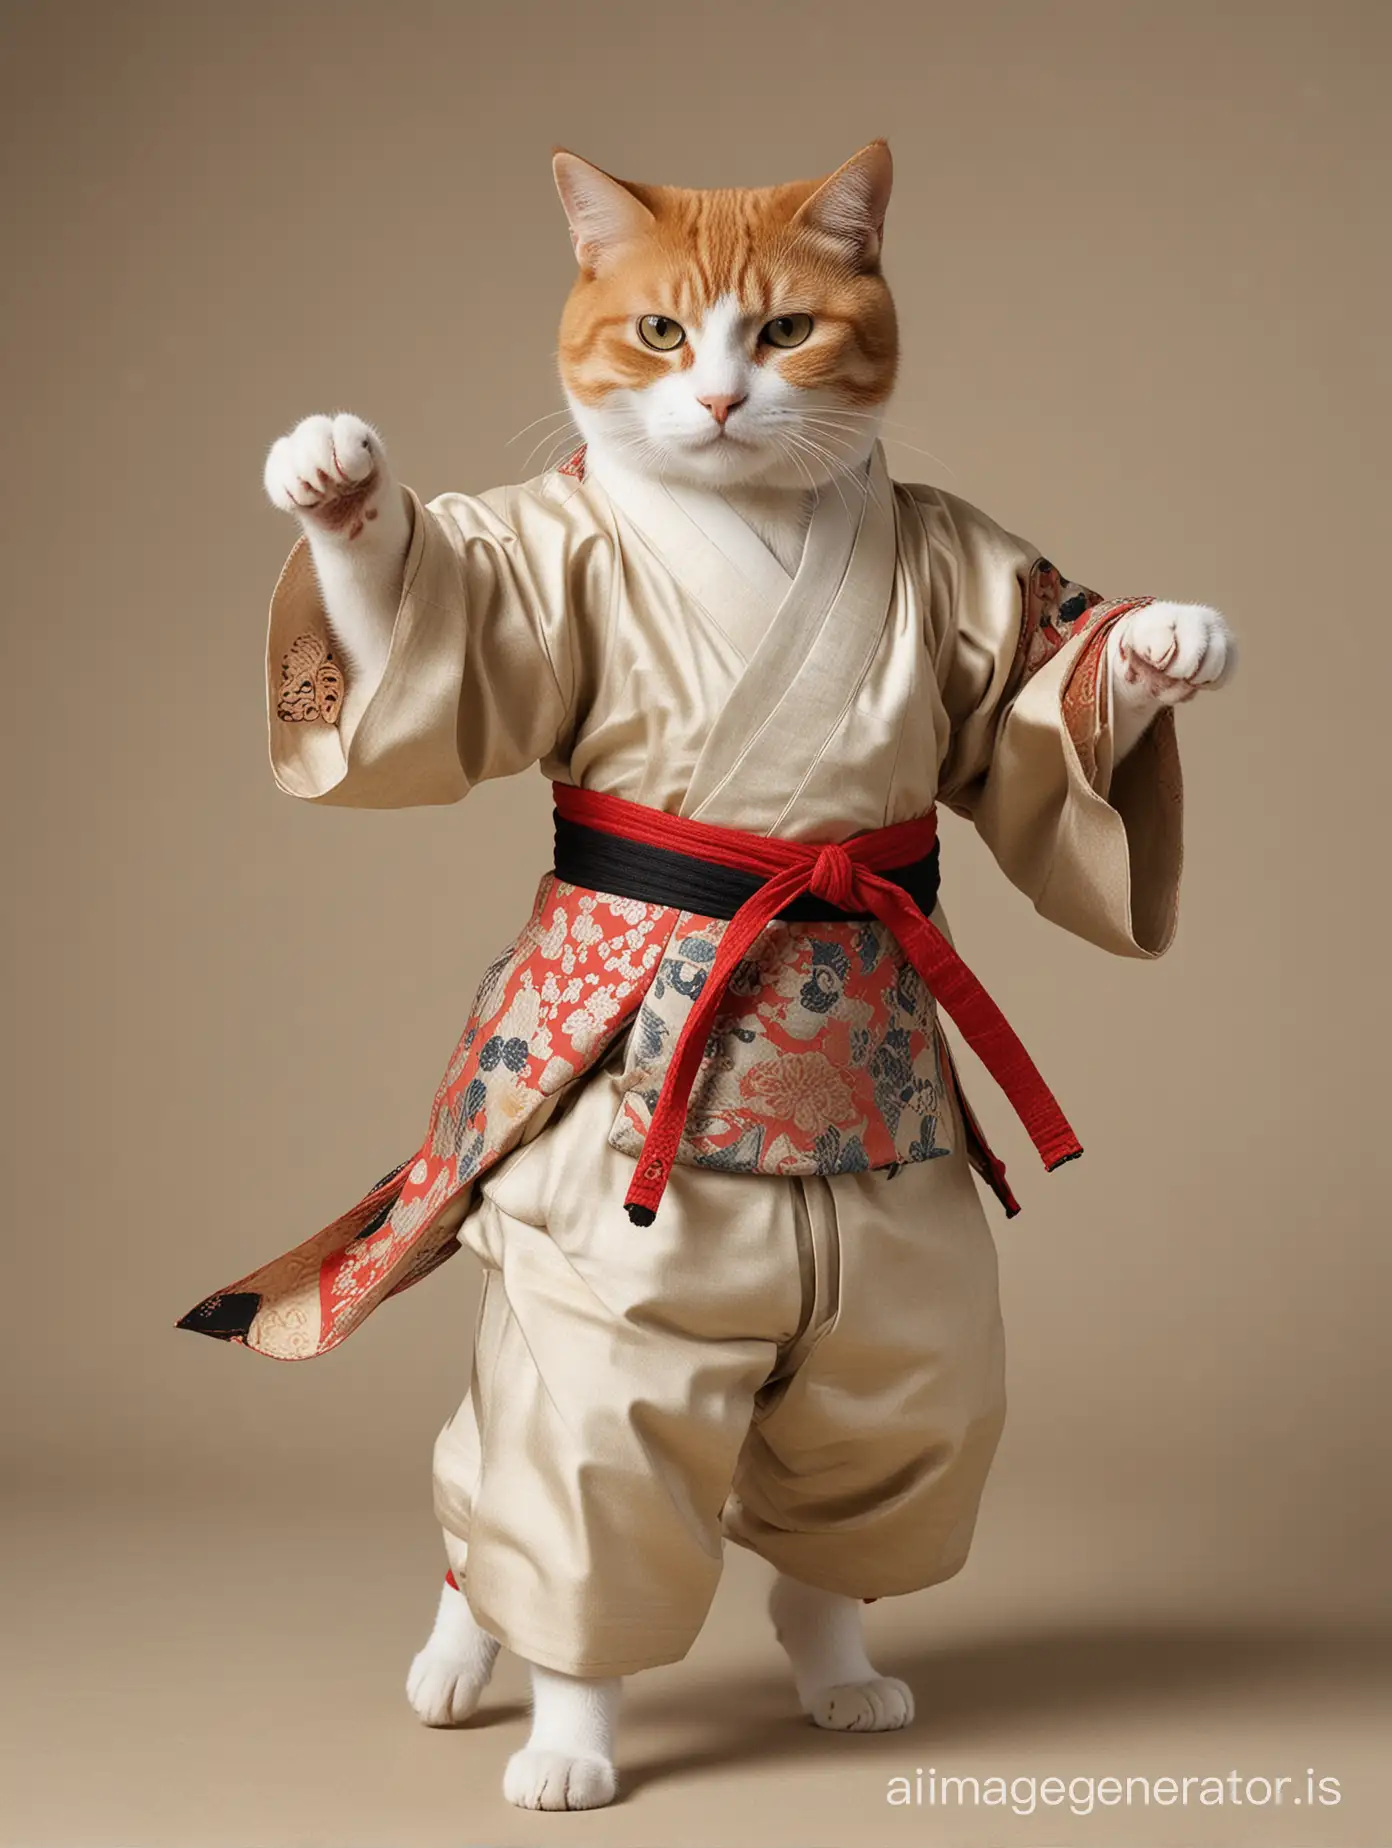 Feline-Martial-Arts-Cat-in-Motion-with-Traditional-Japanese-Attire